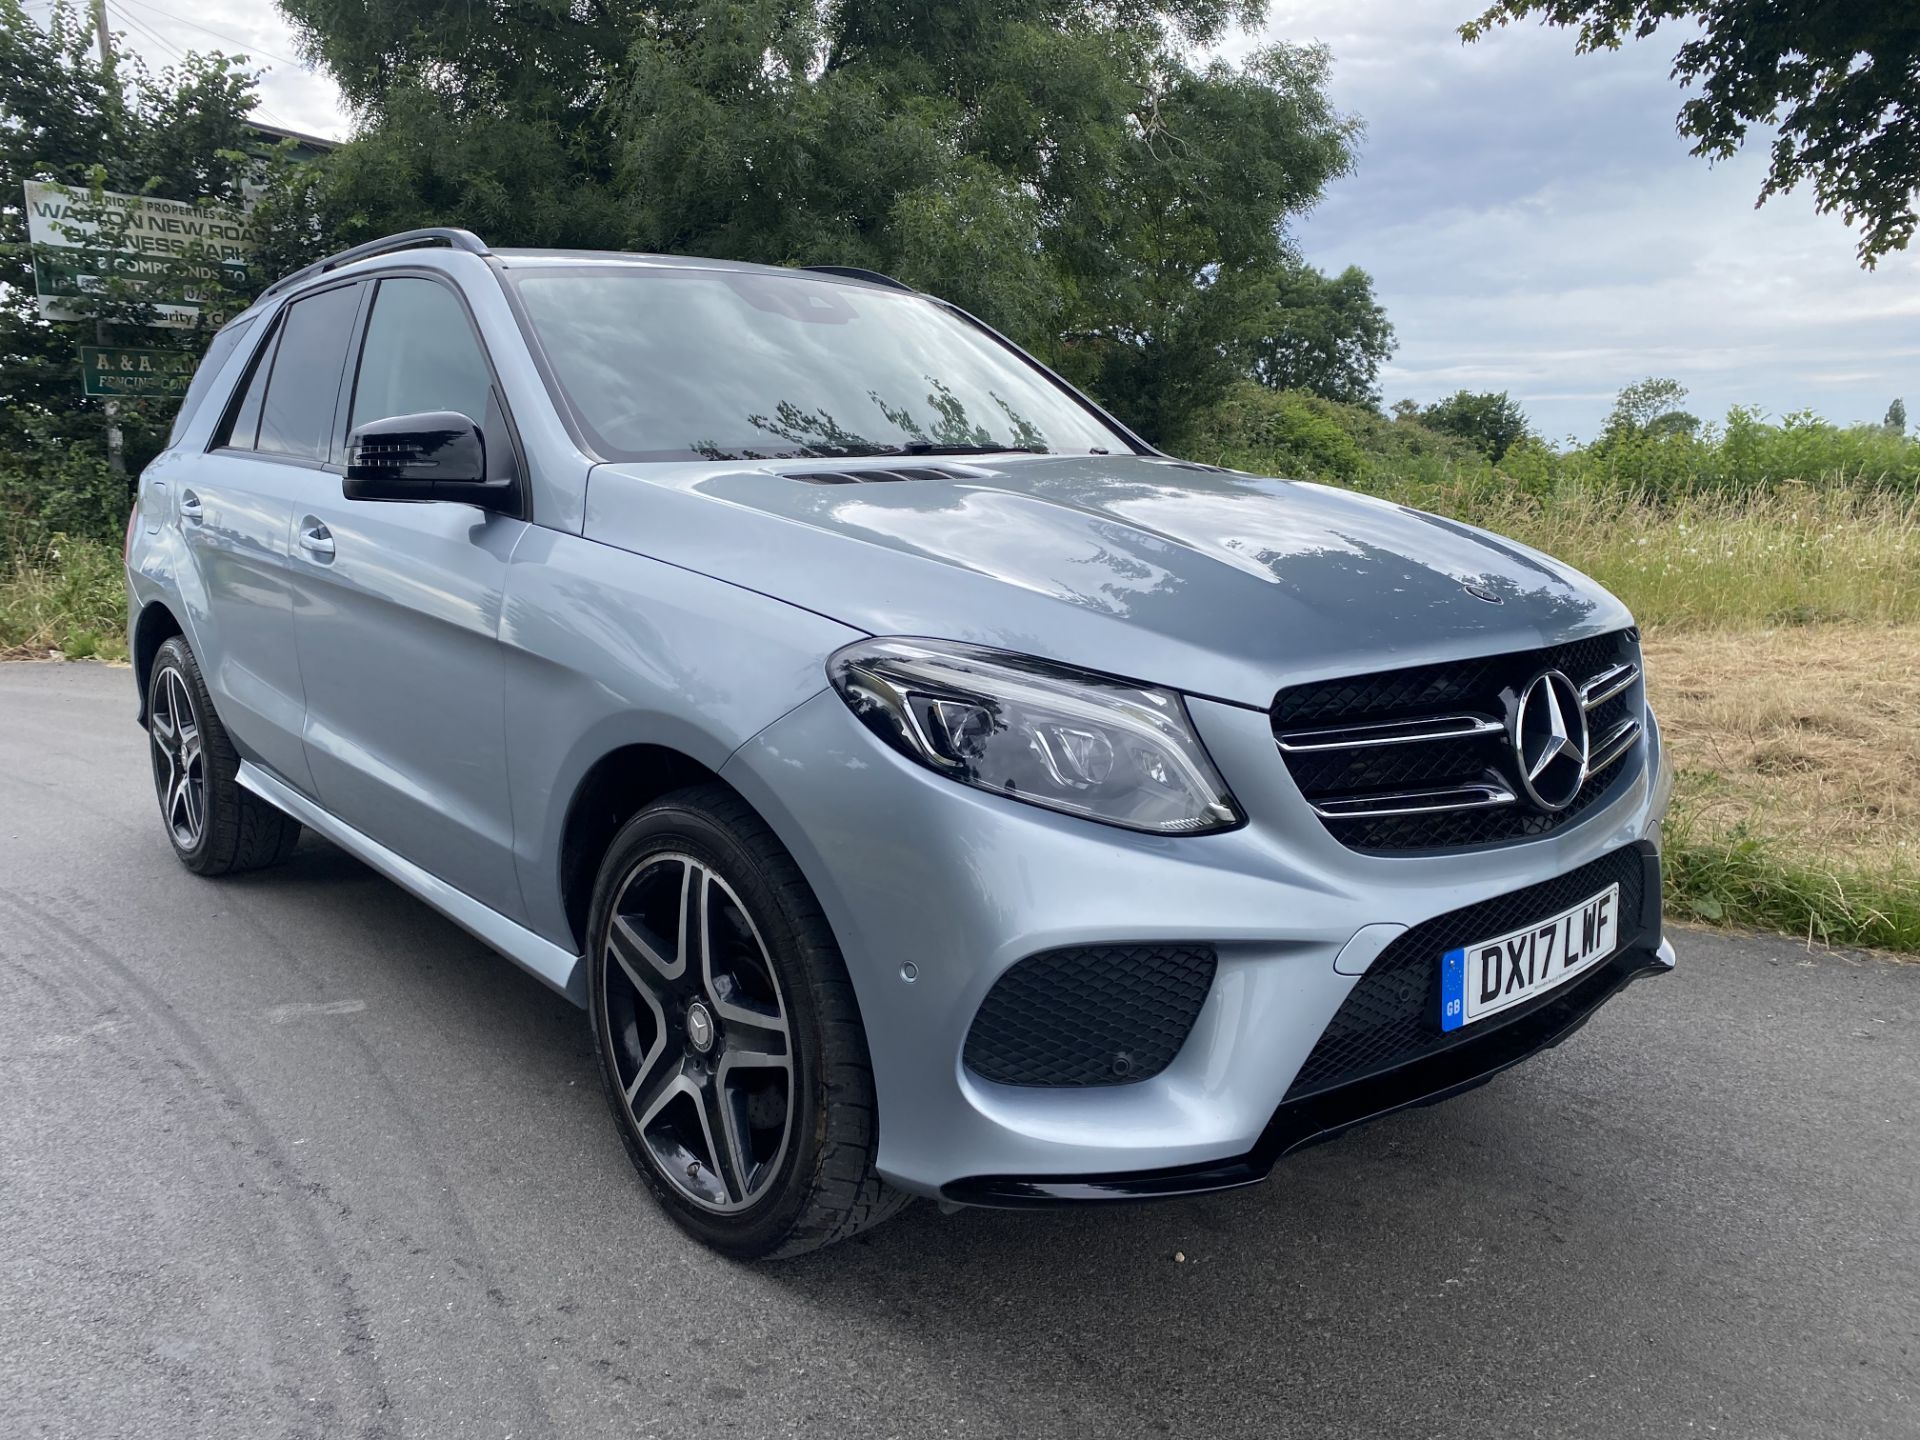 MERCEDES GLE 250d AMG-LINE "NIGHT EDITION" AUTO - 17 REG - 1 OWNER - FULL LEATHER - COMAND - NO VAT! - Image 3 of 36